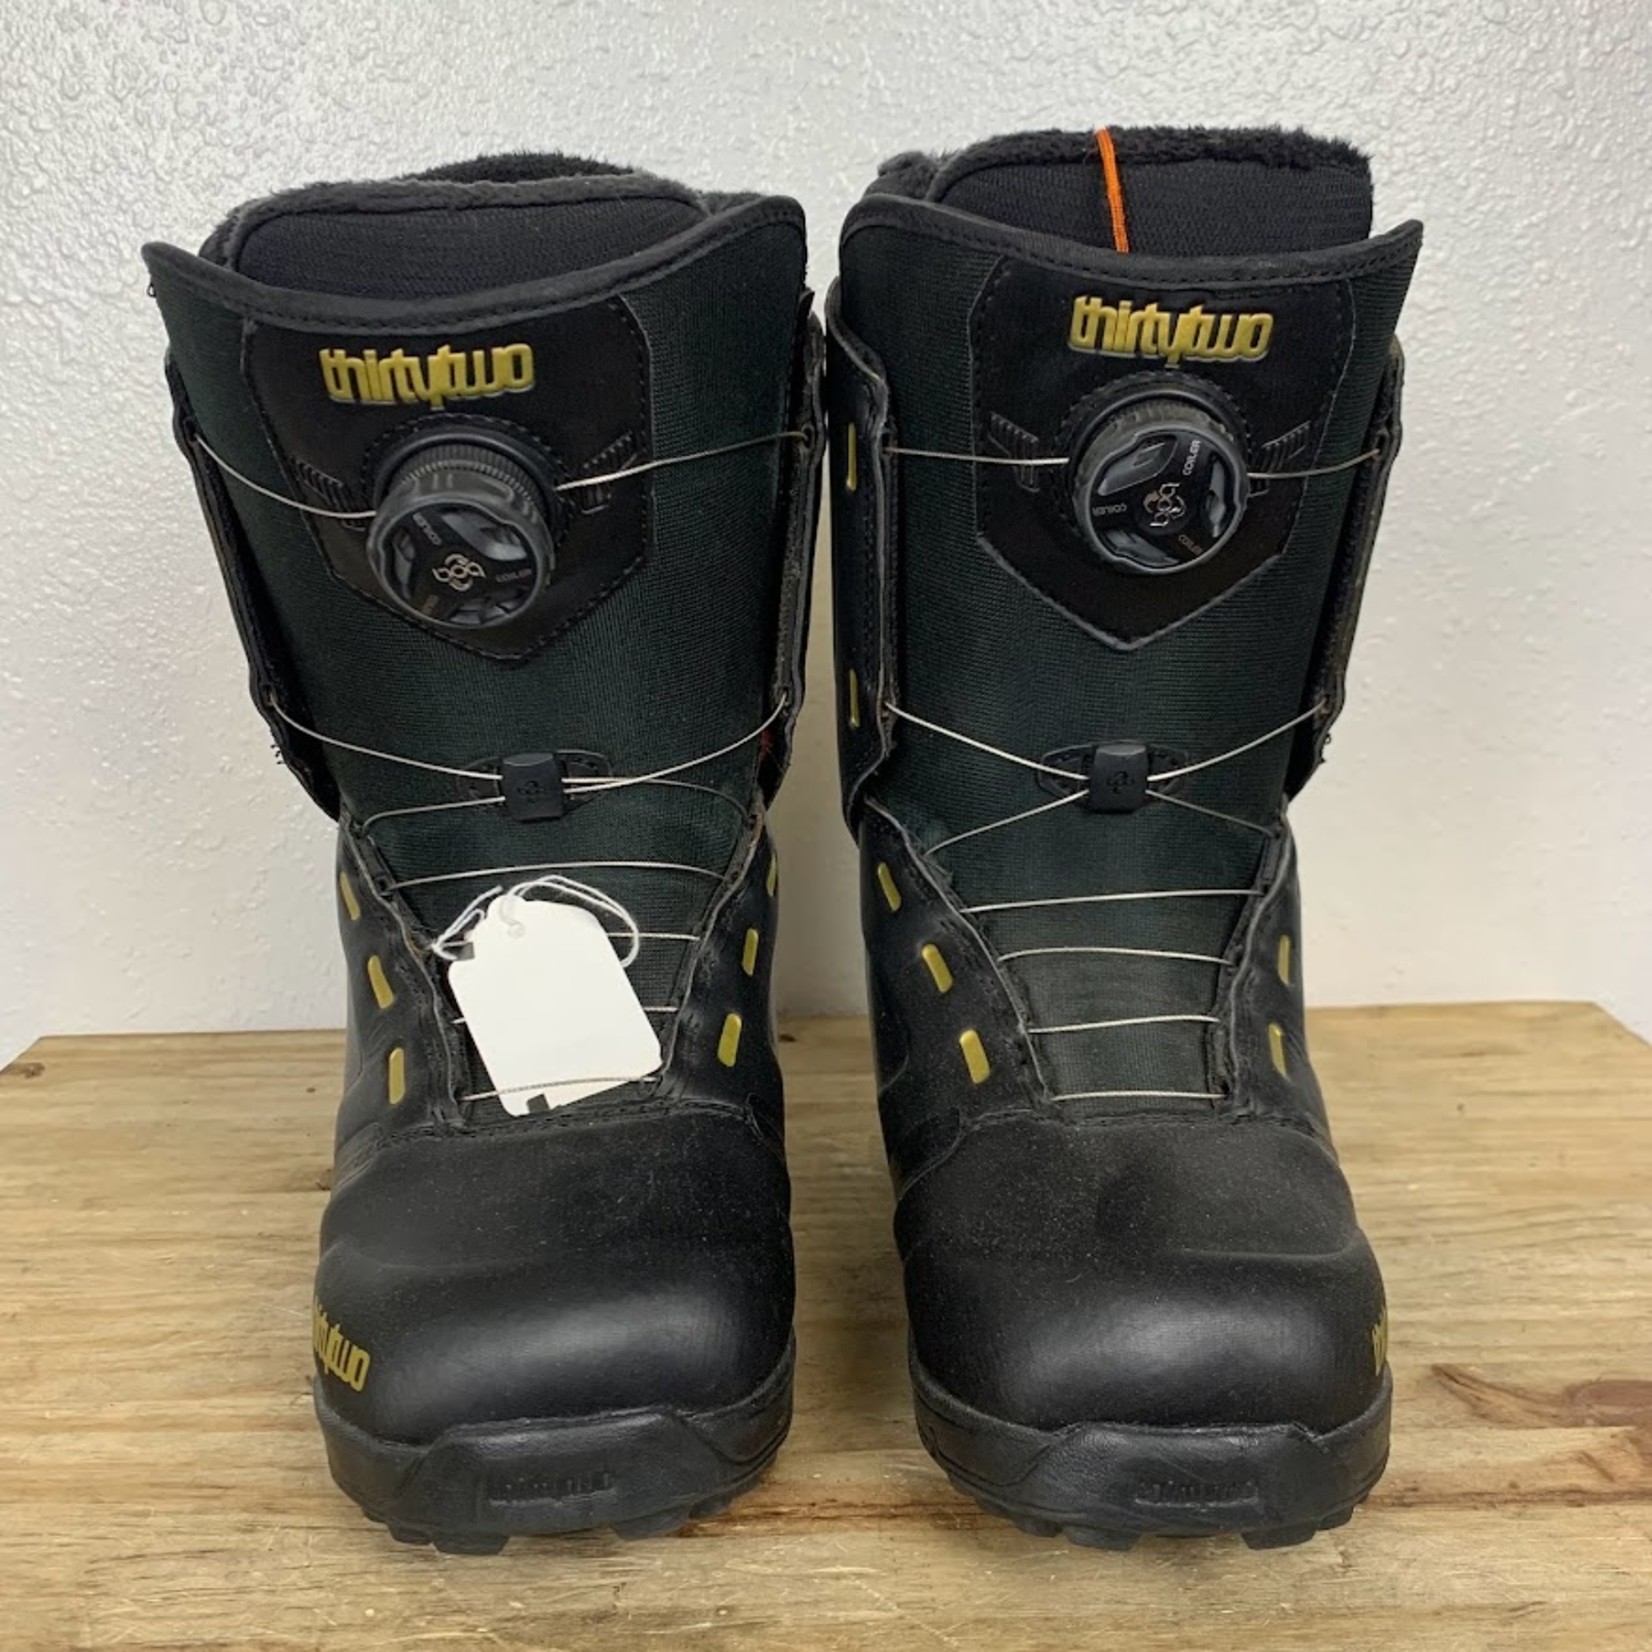 ThirtyTwo Snowboard Boots, Size 6 WMNS